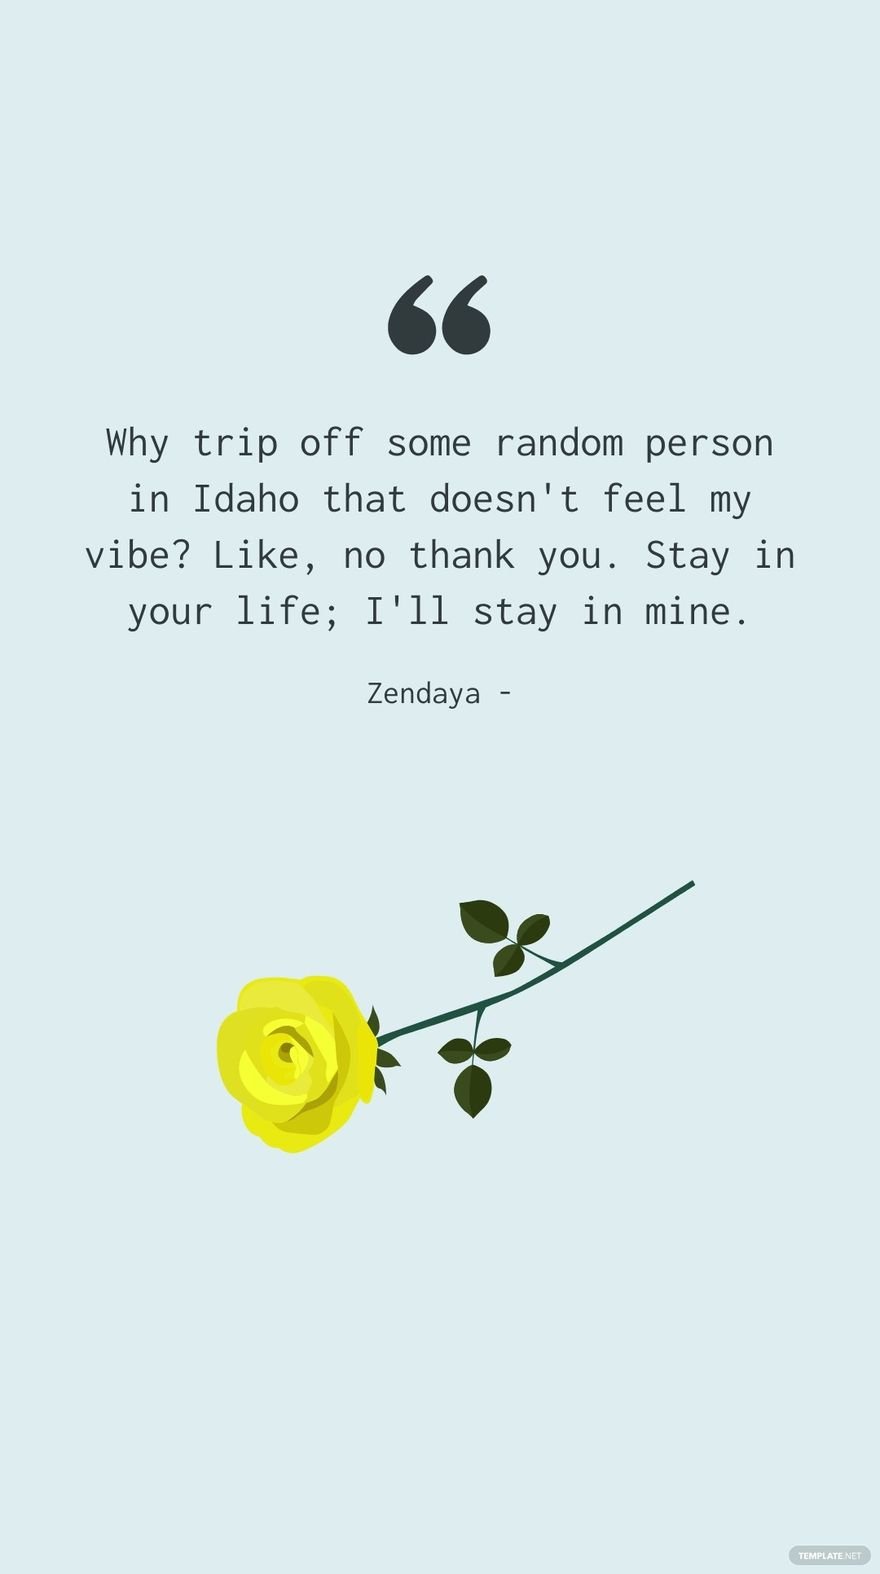 Zendaya - Why trip off some random person in Idaho that doesn't feel my vibe? Like, no thank you. Stay in your life; I'll stay in mine.